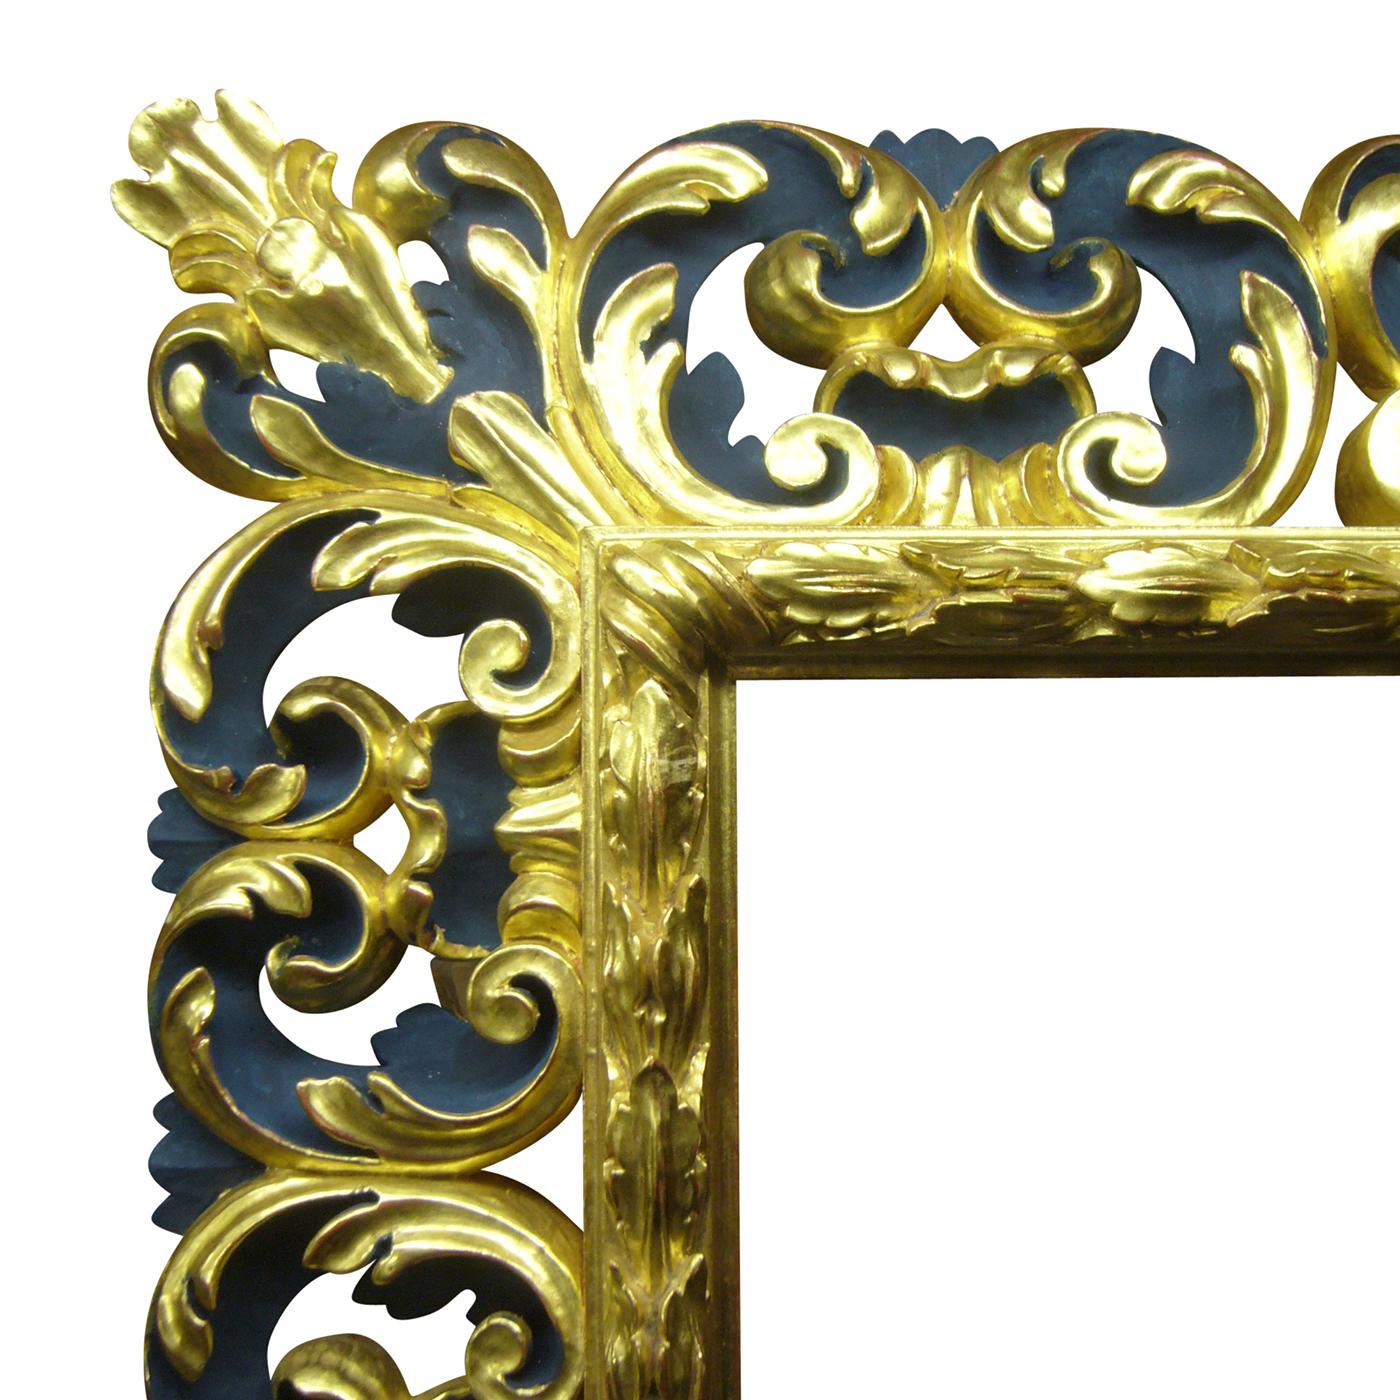 This is a Baroque mirror in pinewood finished in gold and color. The frame is hand-carved with characteristic scrolls and leafs. Its simple shape and beautiful detail make it an ornate piece of decor. It comes with a mirror with an antique finish.
 